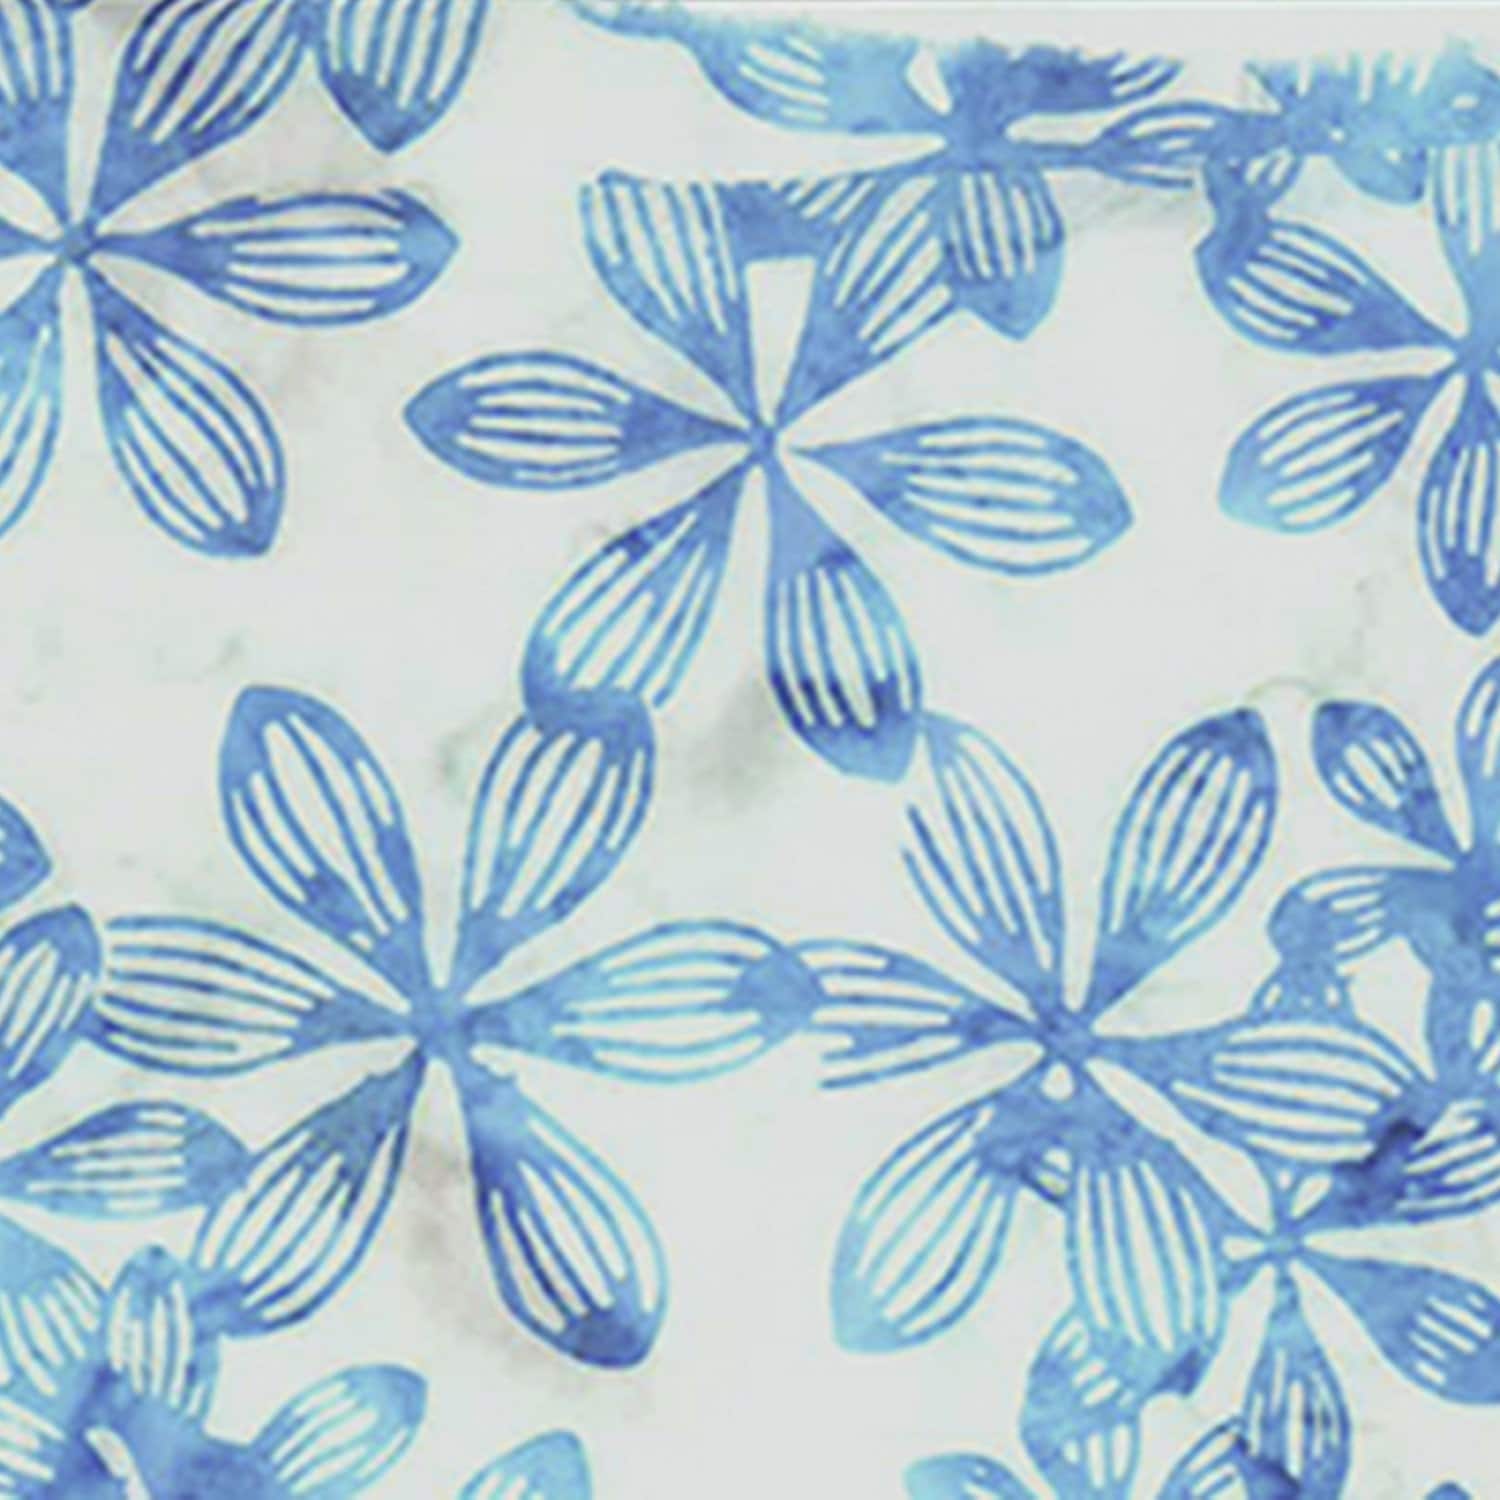 Sold by the 1/2 Yard Shipped as Continuous Yardage Hoffman Azure Dreams Bali Batik Cornflower Maiden Hair